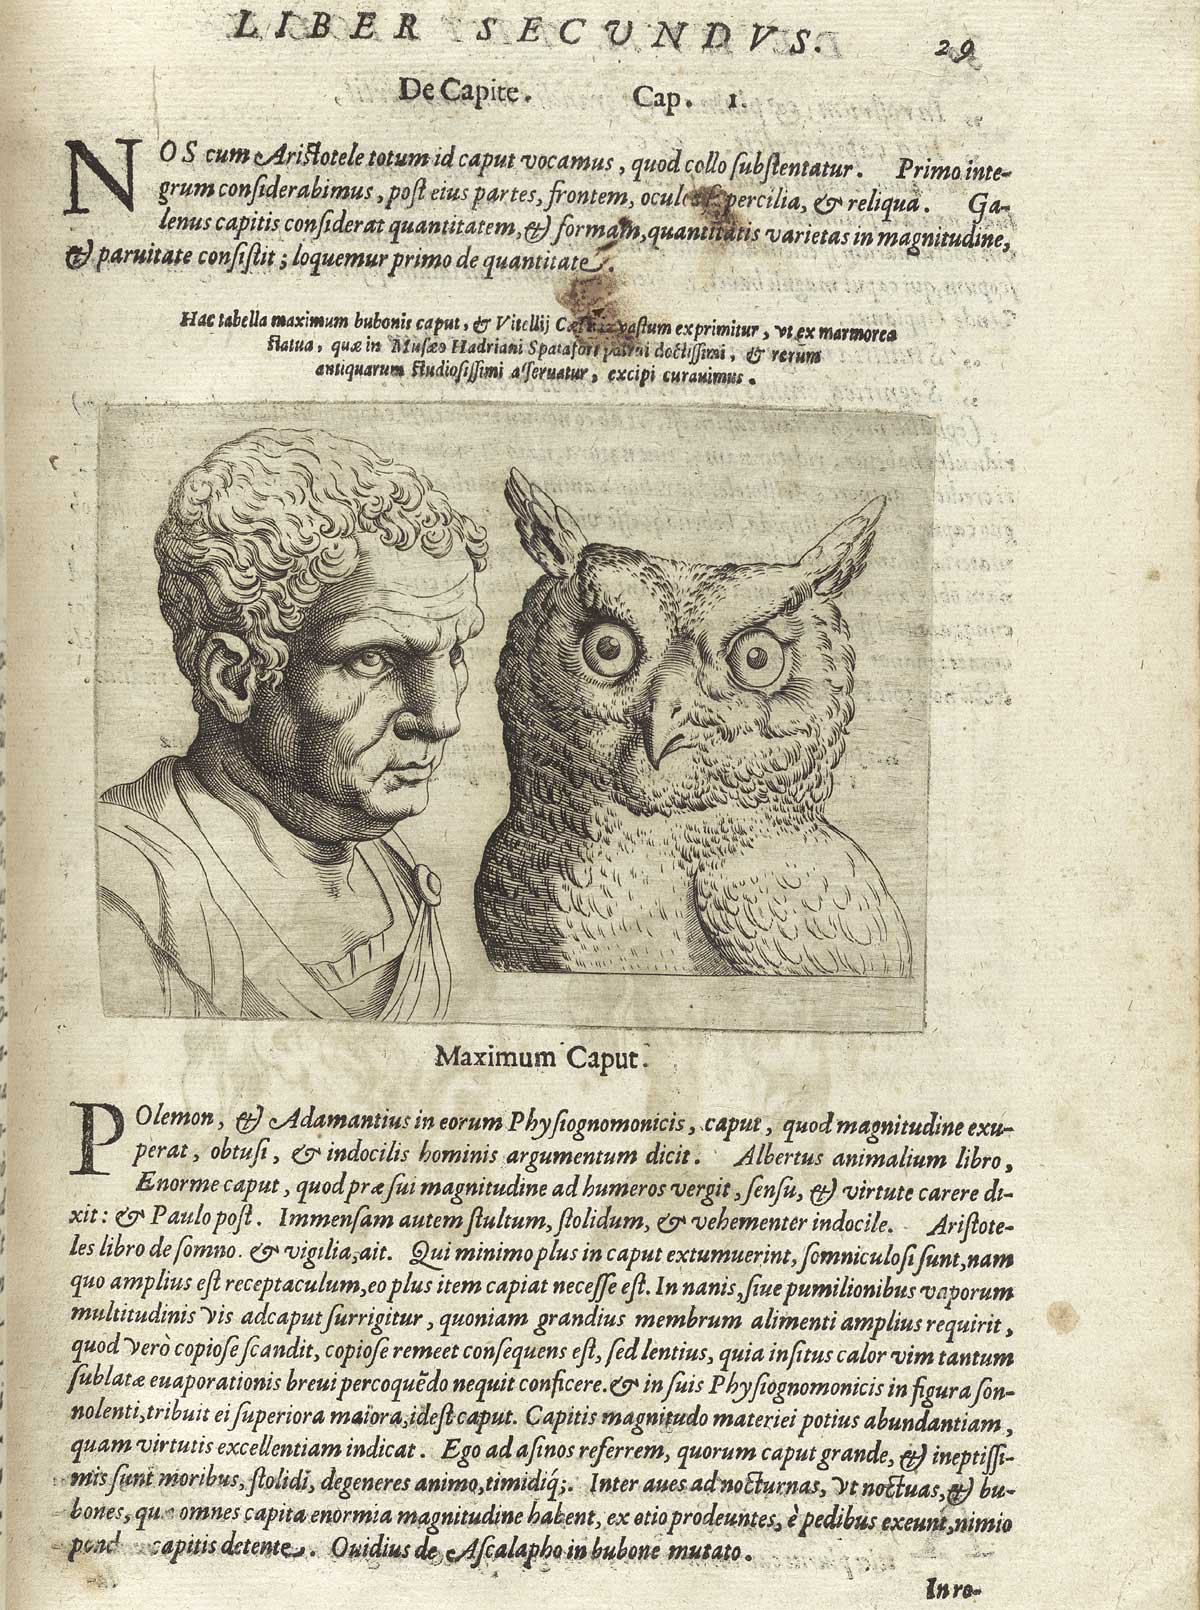 Page 29 of Giambattista della Porta's De humana physiognomonia libri IIII, featuring on the left an image of the head and shoulders view of a man facing to the left and on the right an image of a head and shoulders view of an owl.